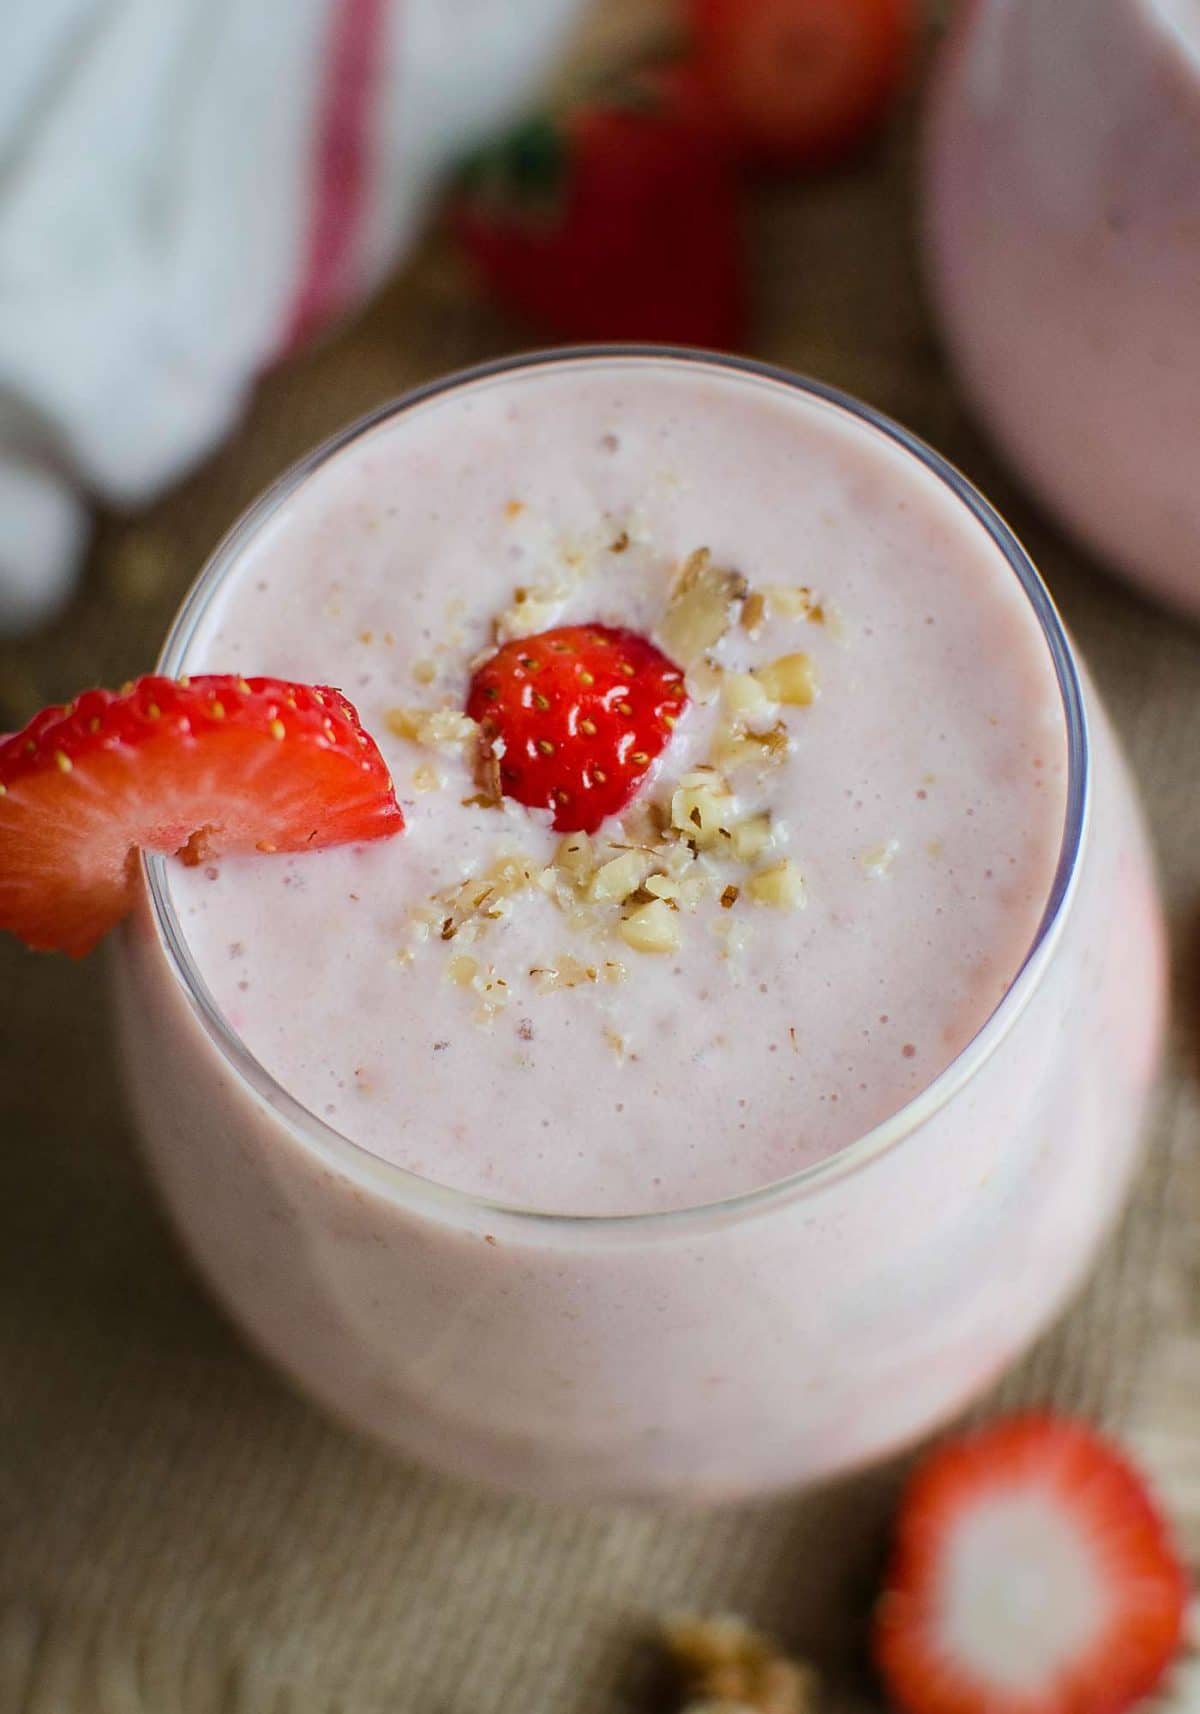 Make this classic healthy strawberry banana smoothie with yogurt for morning breakfasts or snacks. A tasty, nutritious and low-fat drink.